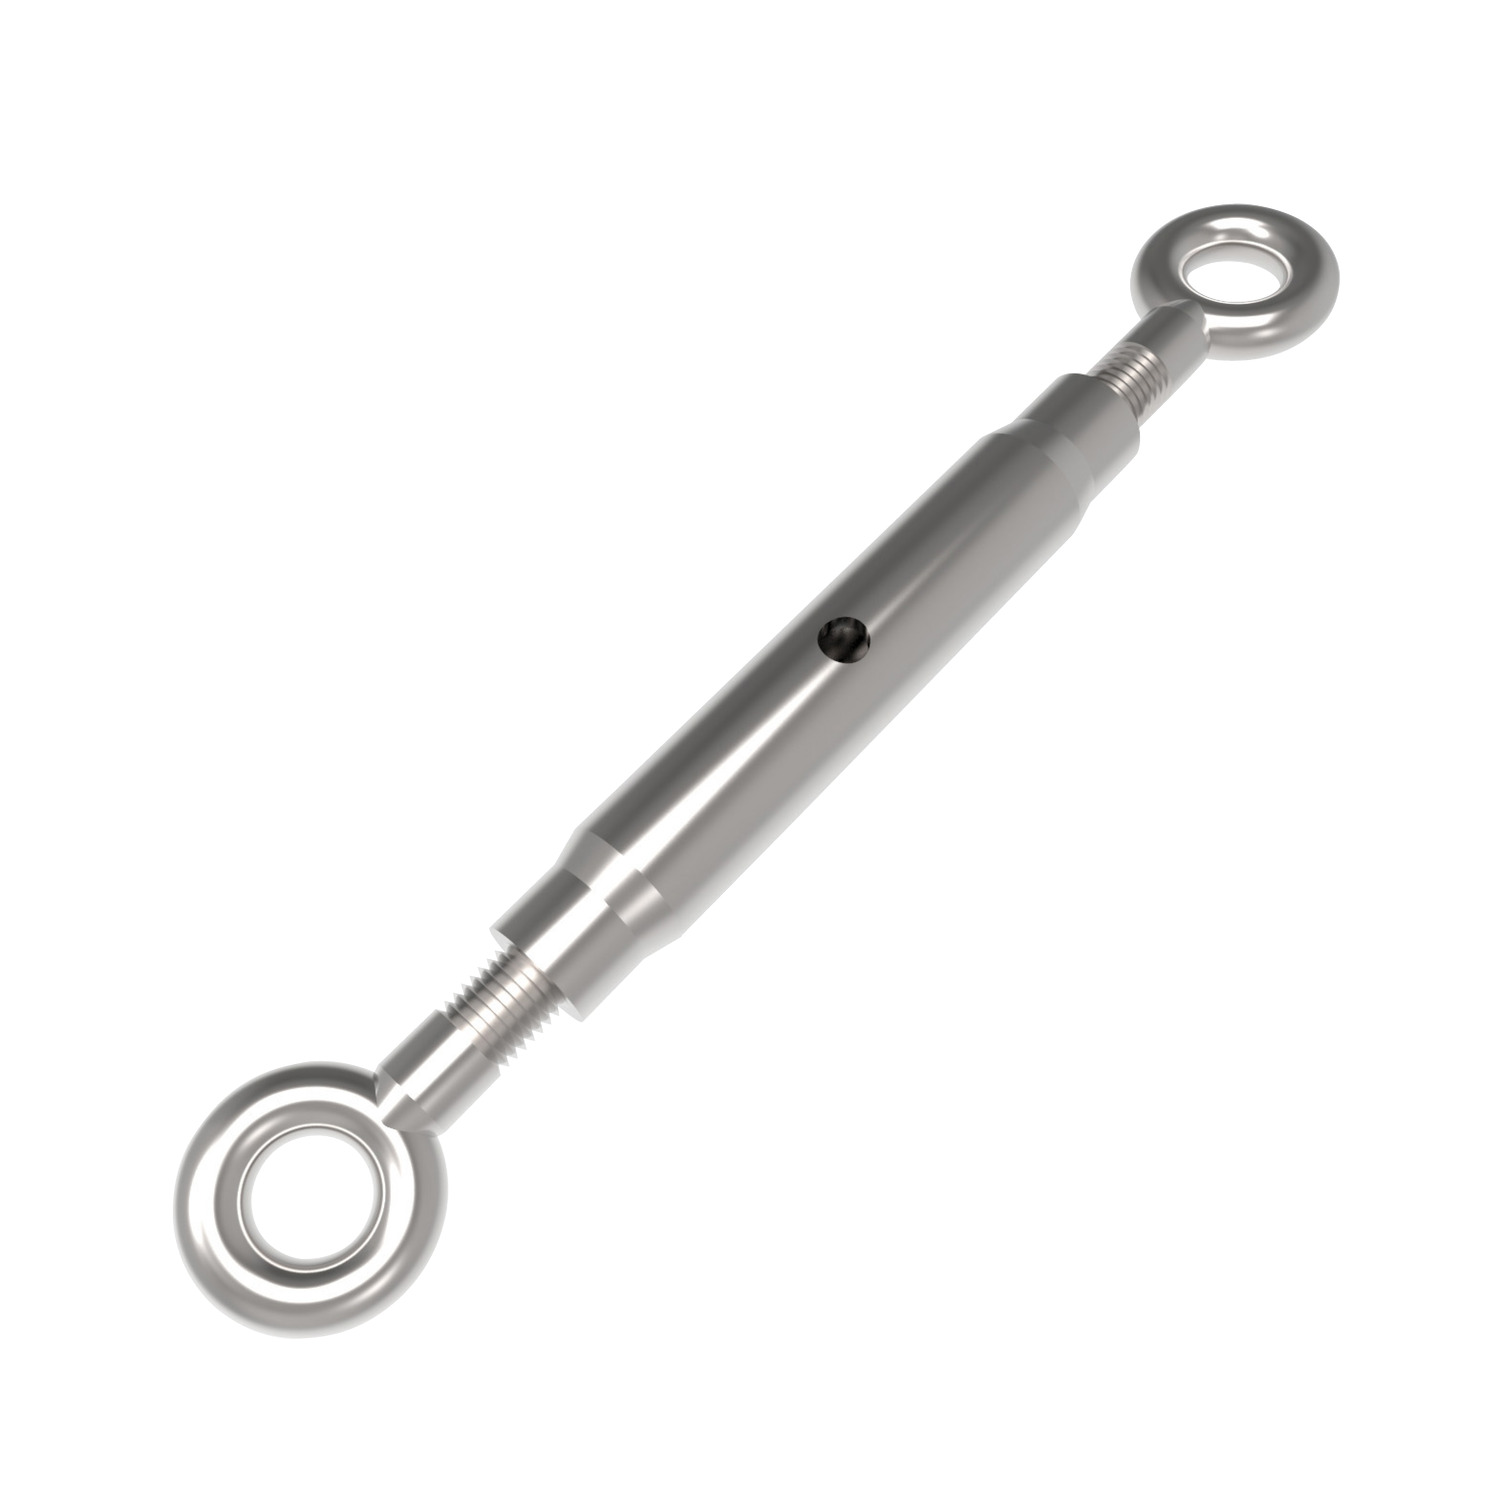 Eye End Pipe Body Turnbuckles Eye end pipe body steel turnbuckles. Manufactured to DIN 1478. Sizes ranging from M6 to M48. Lengths from 110mm to 355mm.